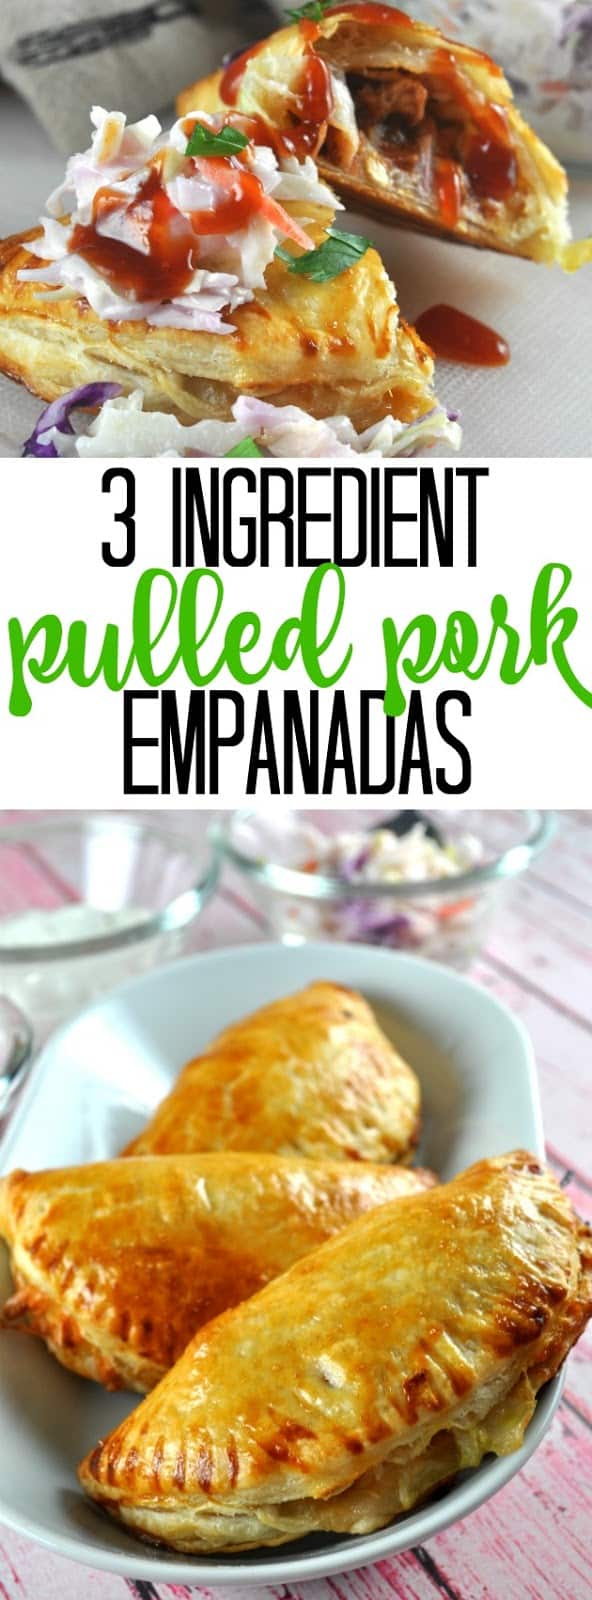 One of my favorite quick serve meals is empanadas! These pulled pork empanadas are on the table in 30 minutes! Plus I've got 3 different filling options that will make everyone happy!  via @foodhussy